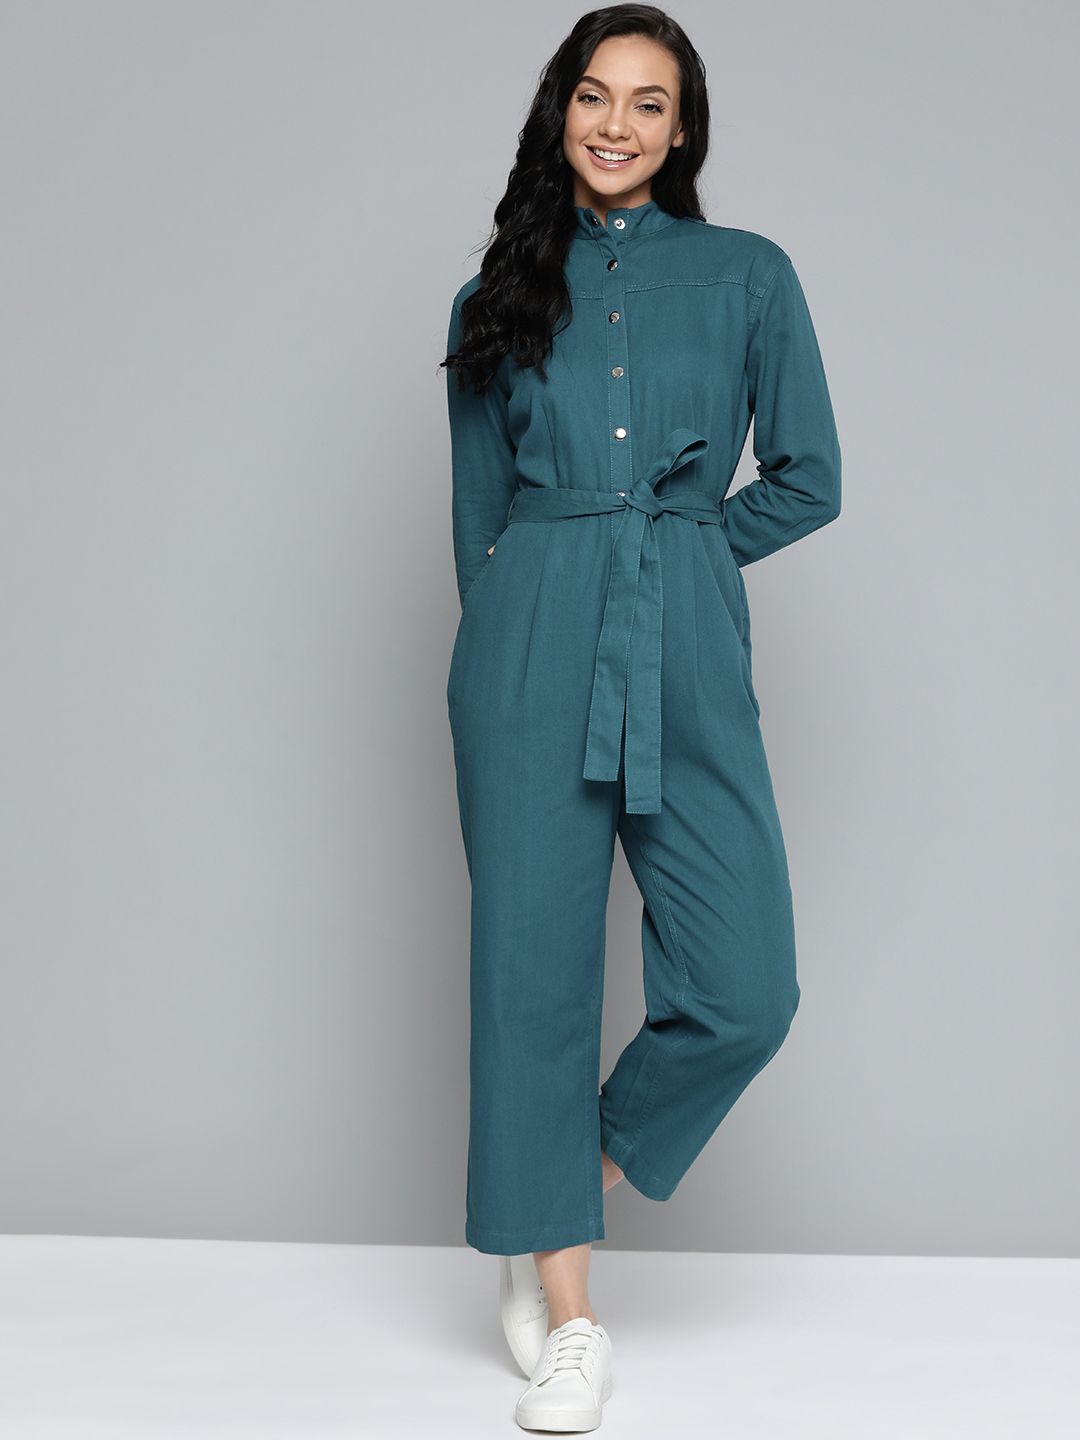 Mast & Harbour Teal Blue Pure Cotton Solid Basic Jumpsuit with Belt Price in India